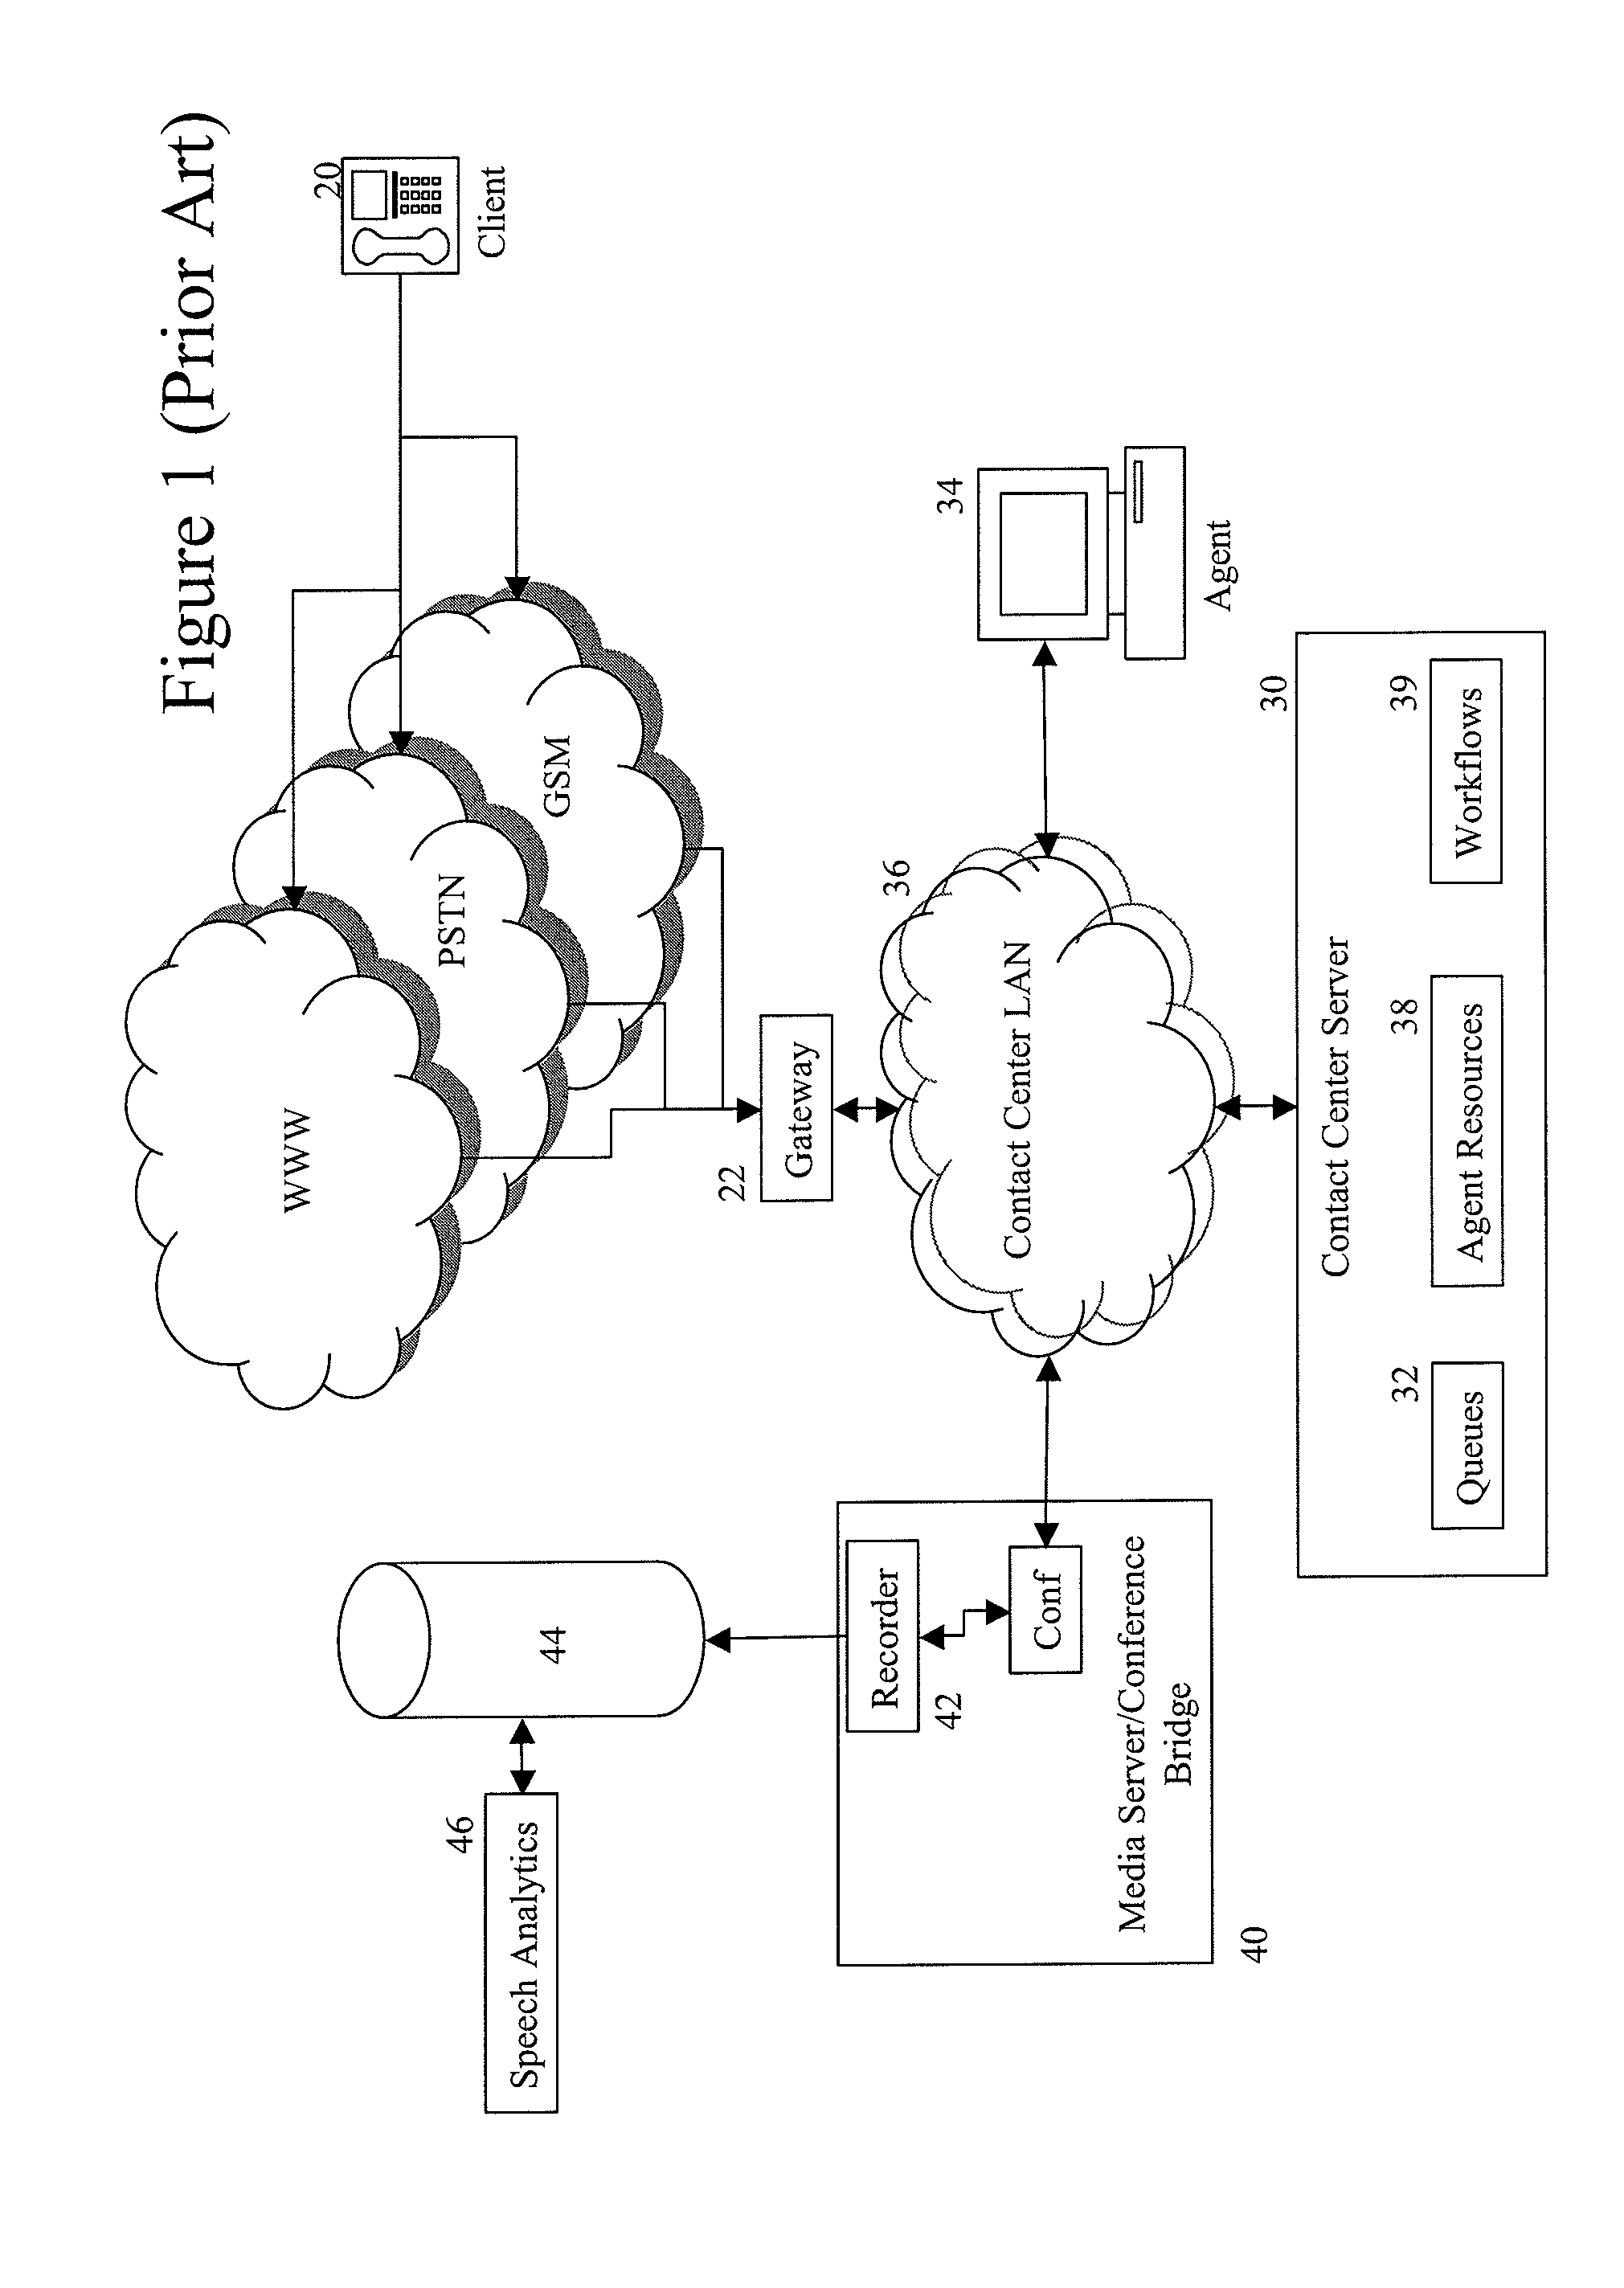 Method and Apparatus for Monitoring Contact Center Performance